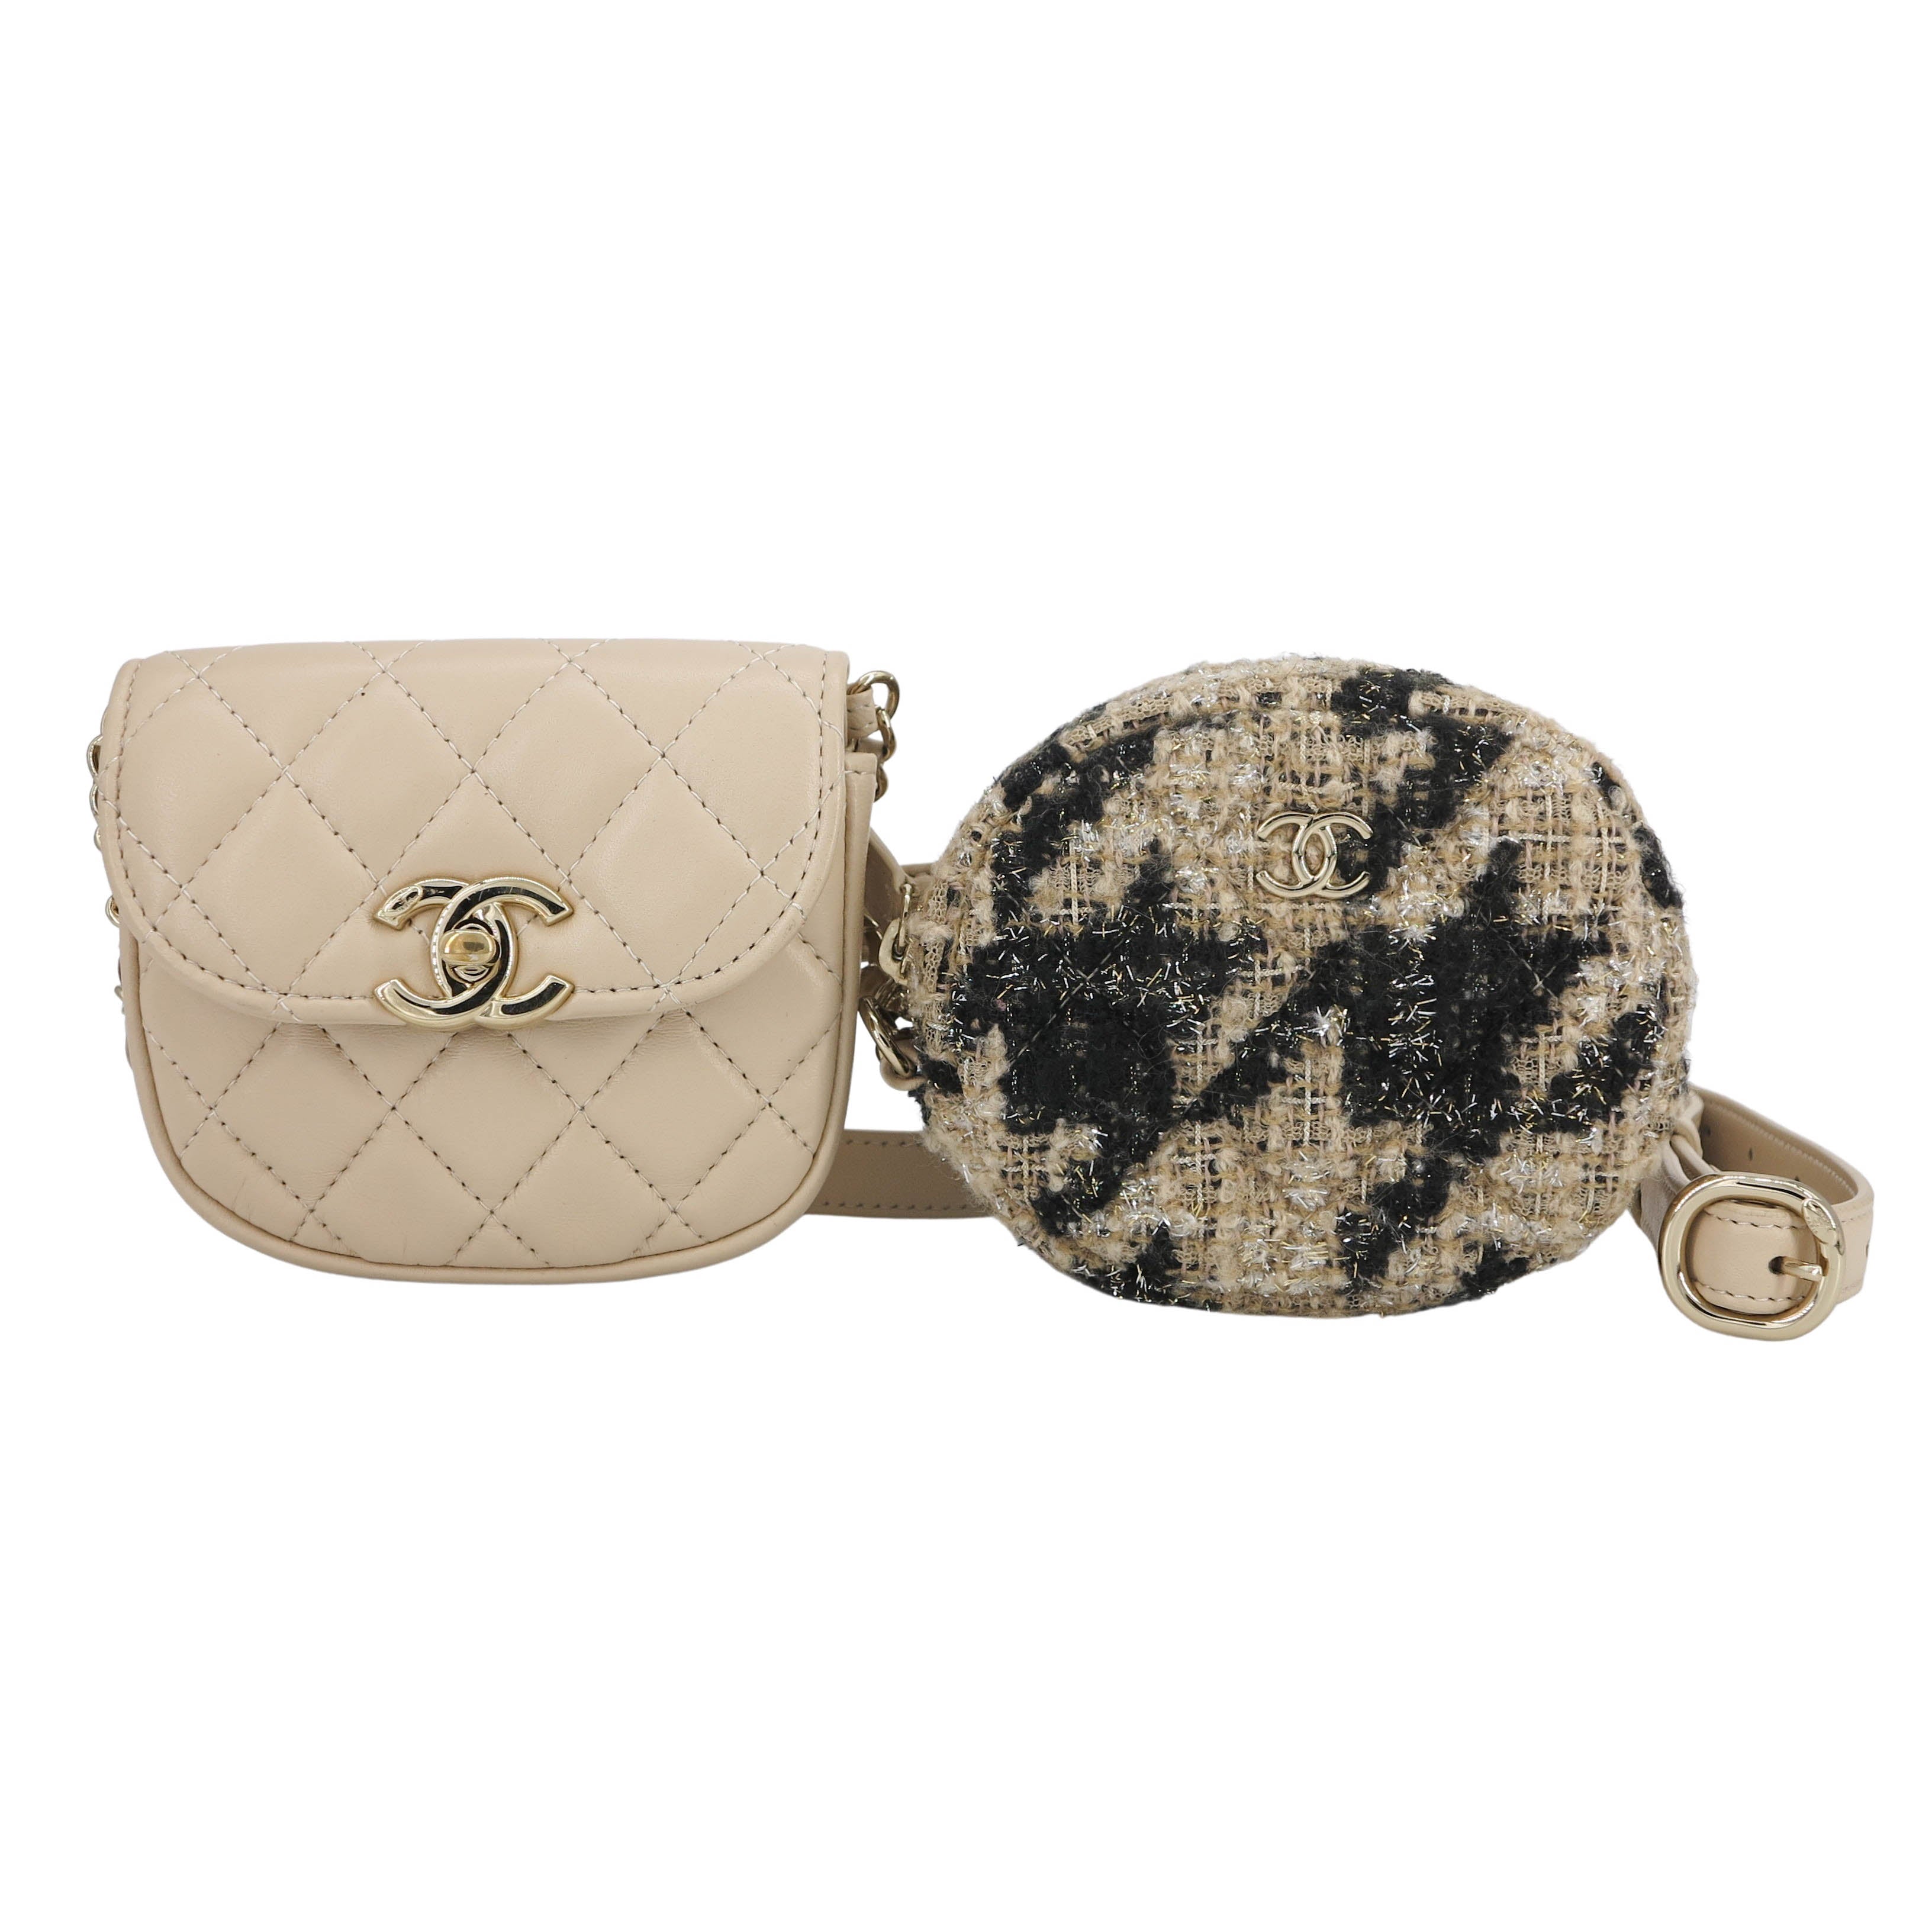 CHANEL 19K Beige Houndstooth Waist Bag with Coin Purse